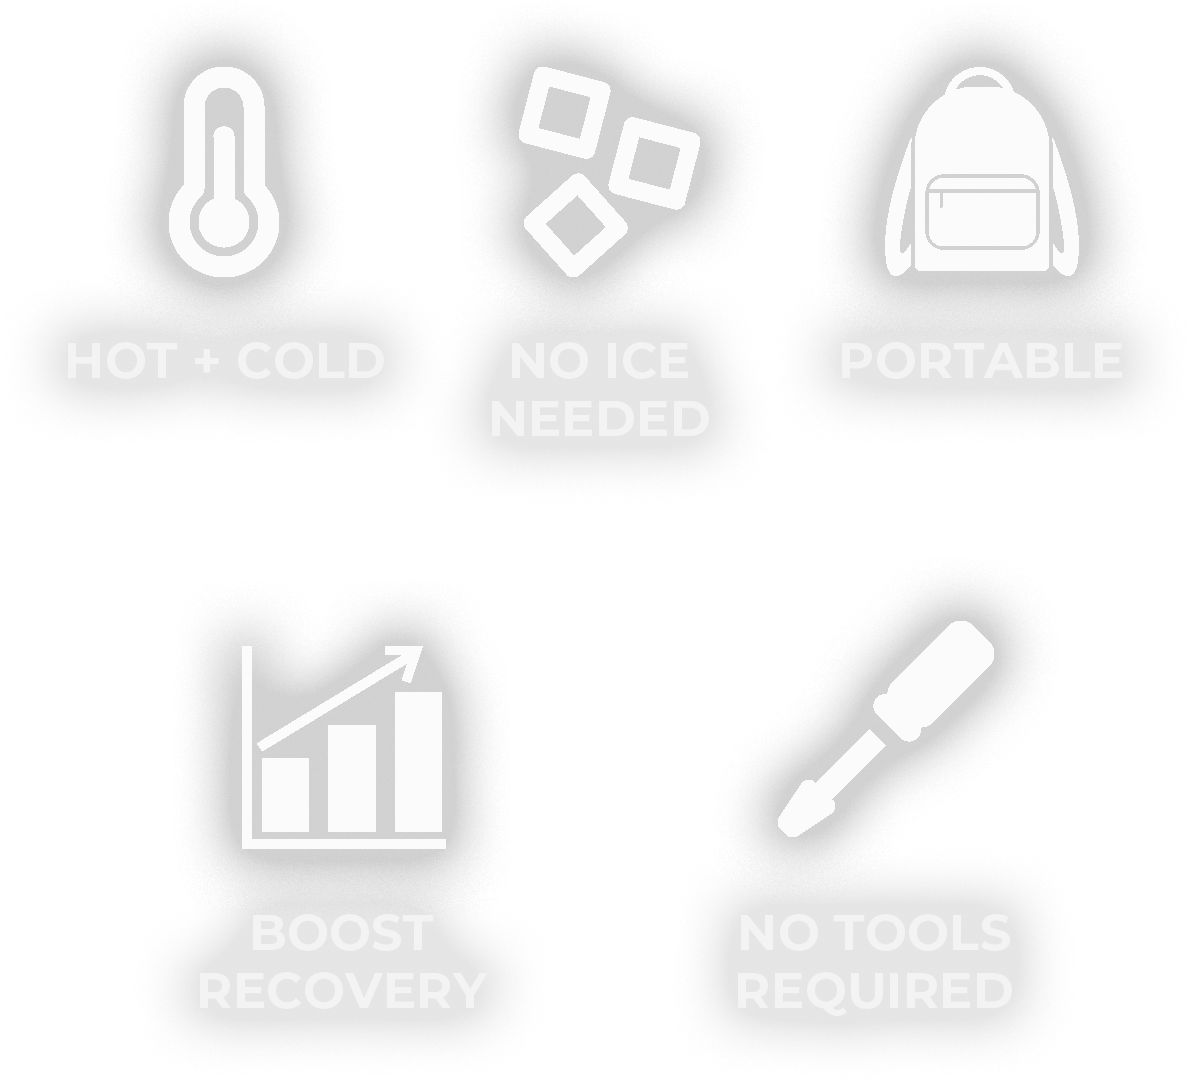 10X Pro Plunge features: hot and cold settings, no ice needed, portable, boost recovery, no tools required